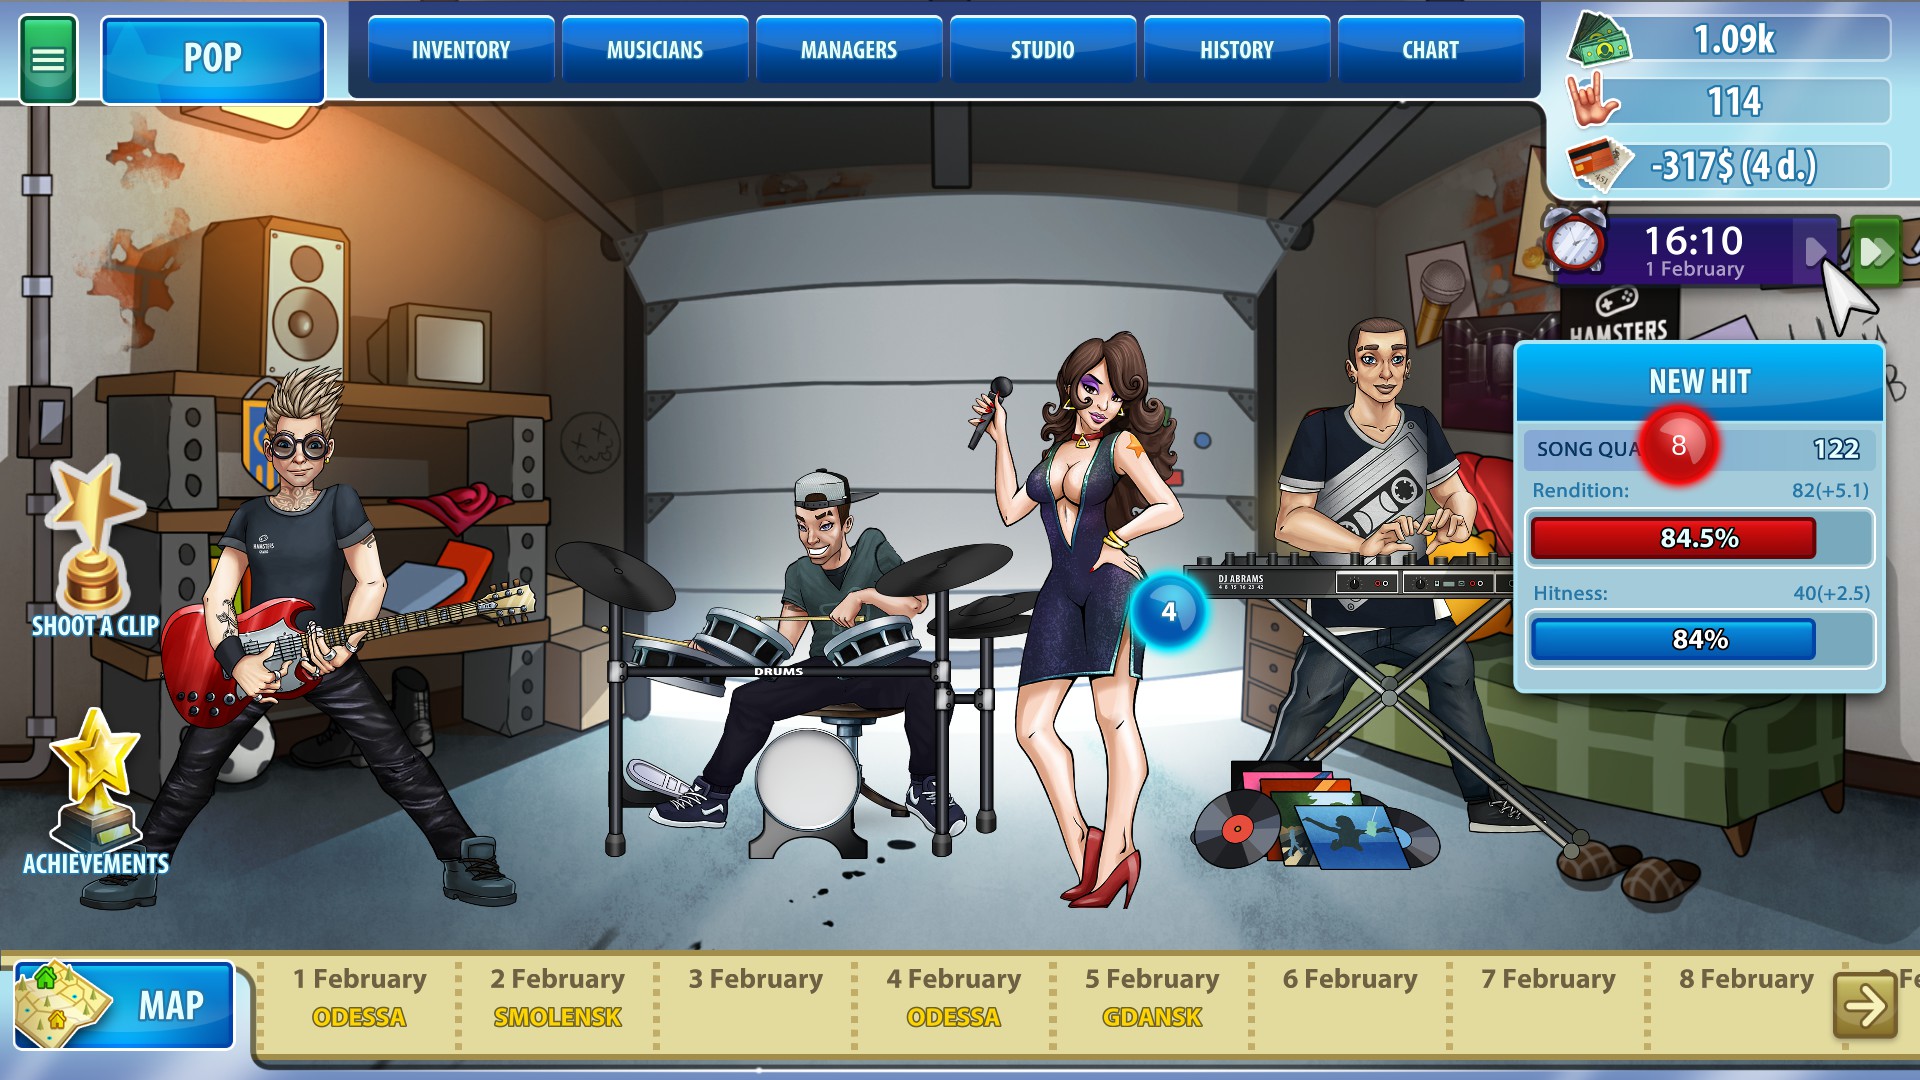 online band manager games